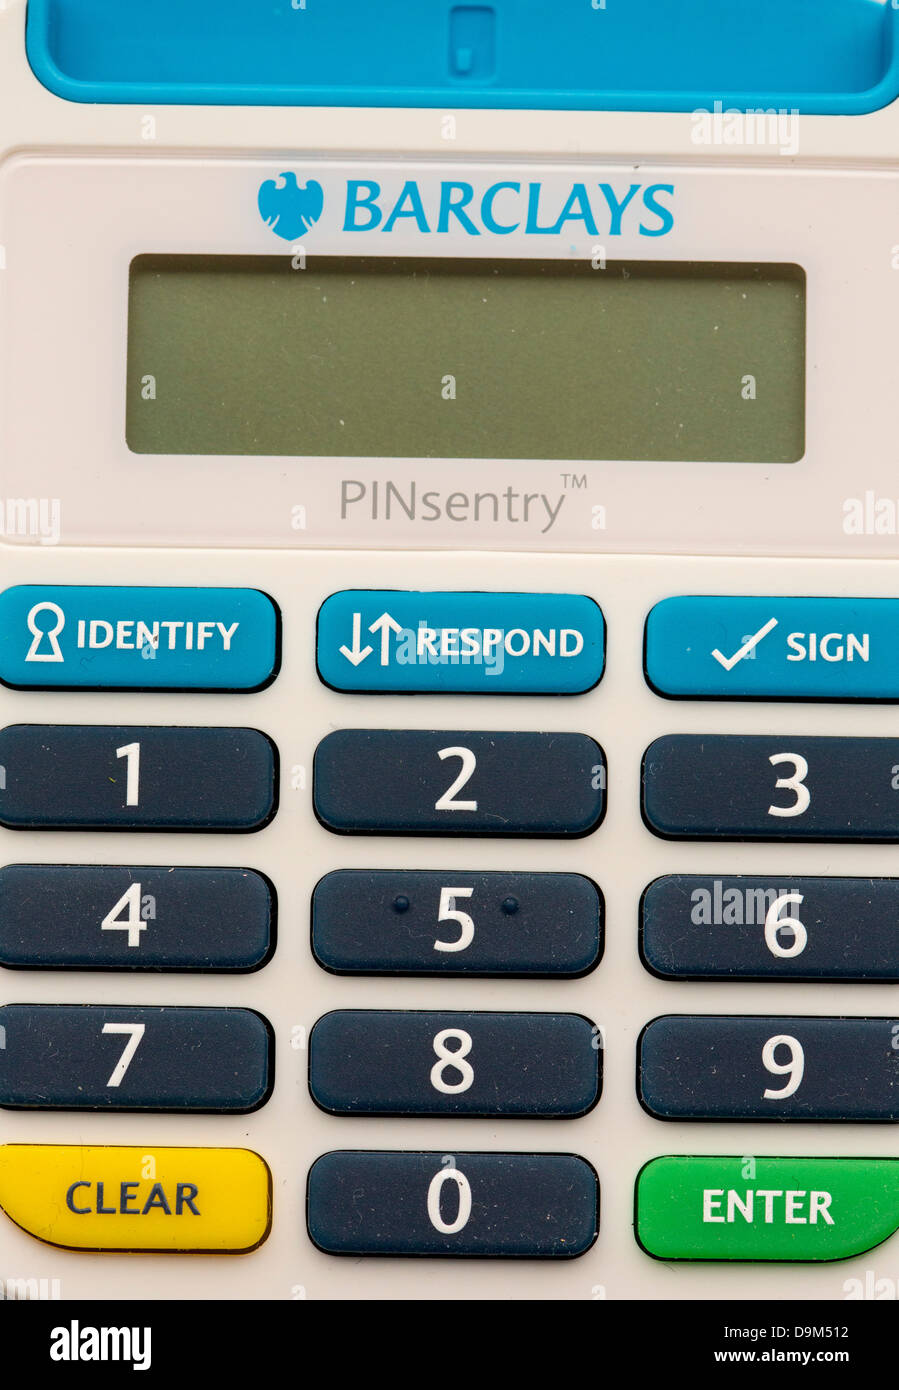 A pin sentry machine that generates a unique security code for accessing internet banking services to combat fraud. Stock Photo